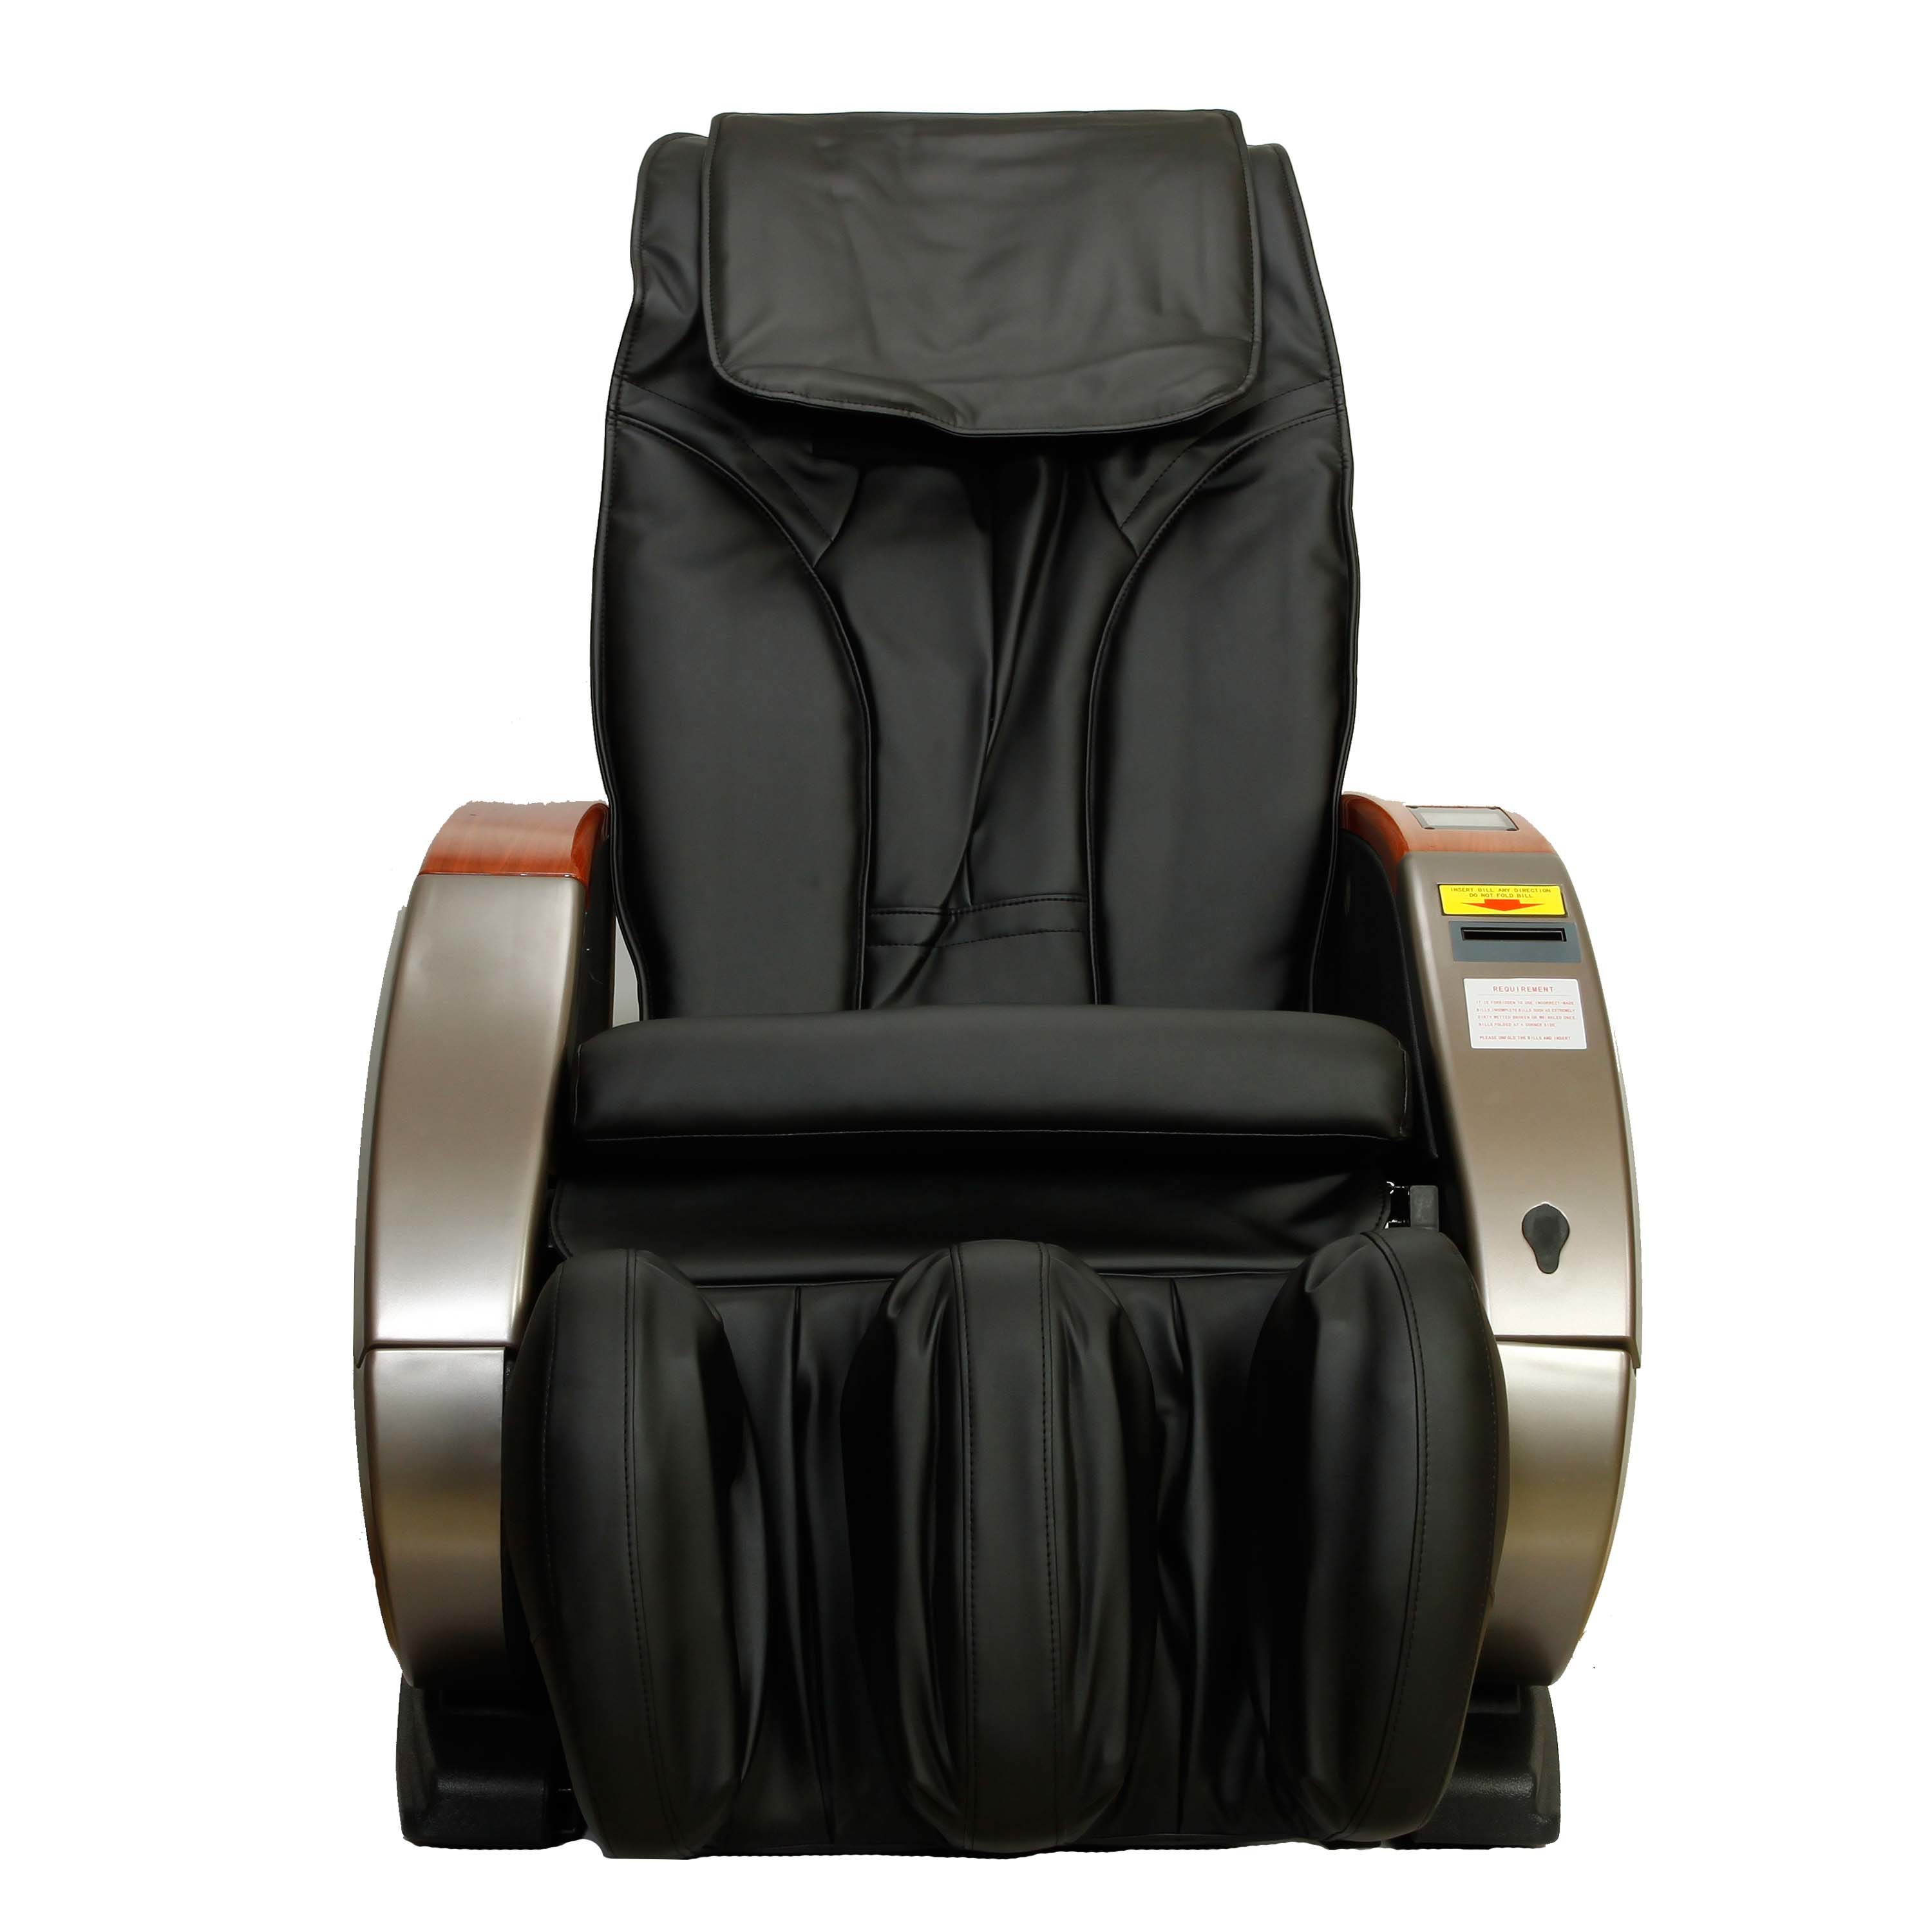 Public Vending Bill Operated Massage Chair for Sale